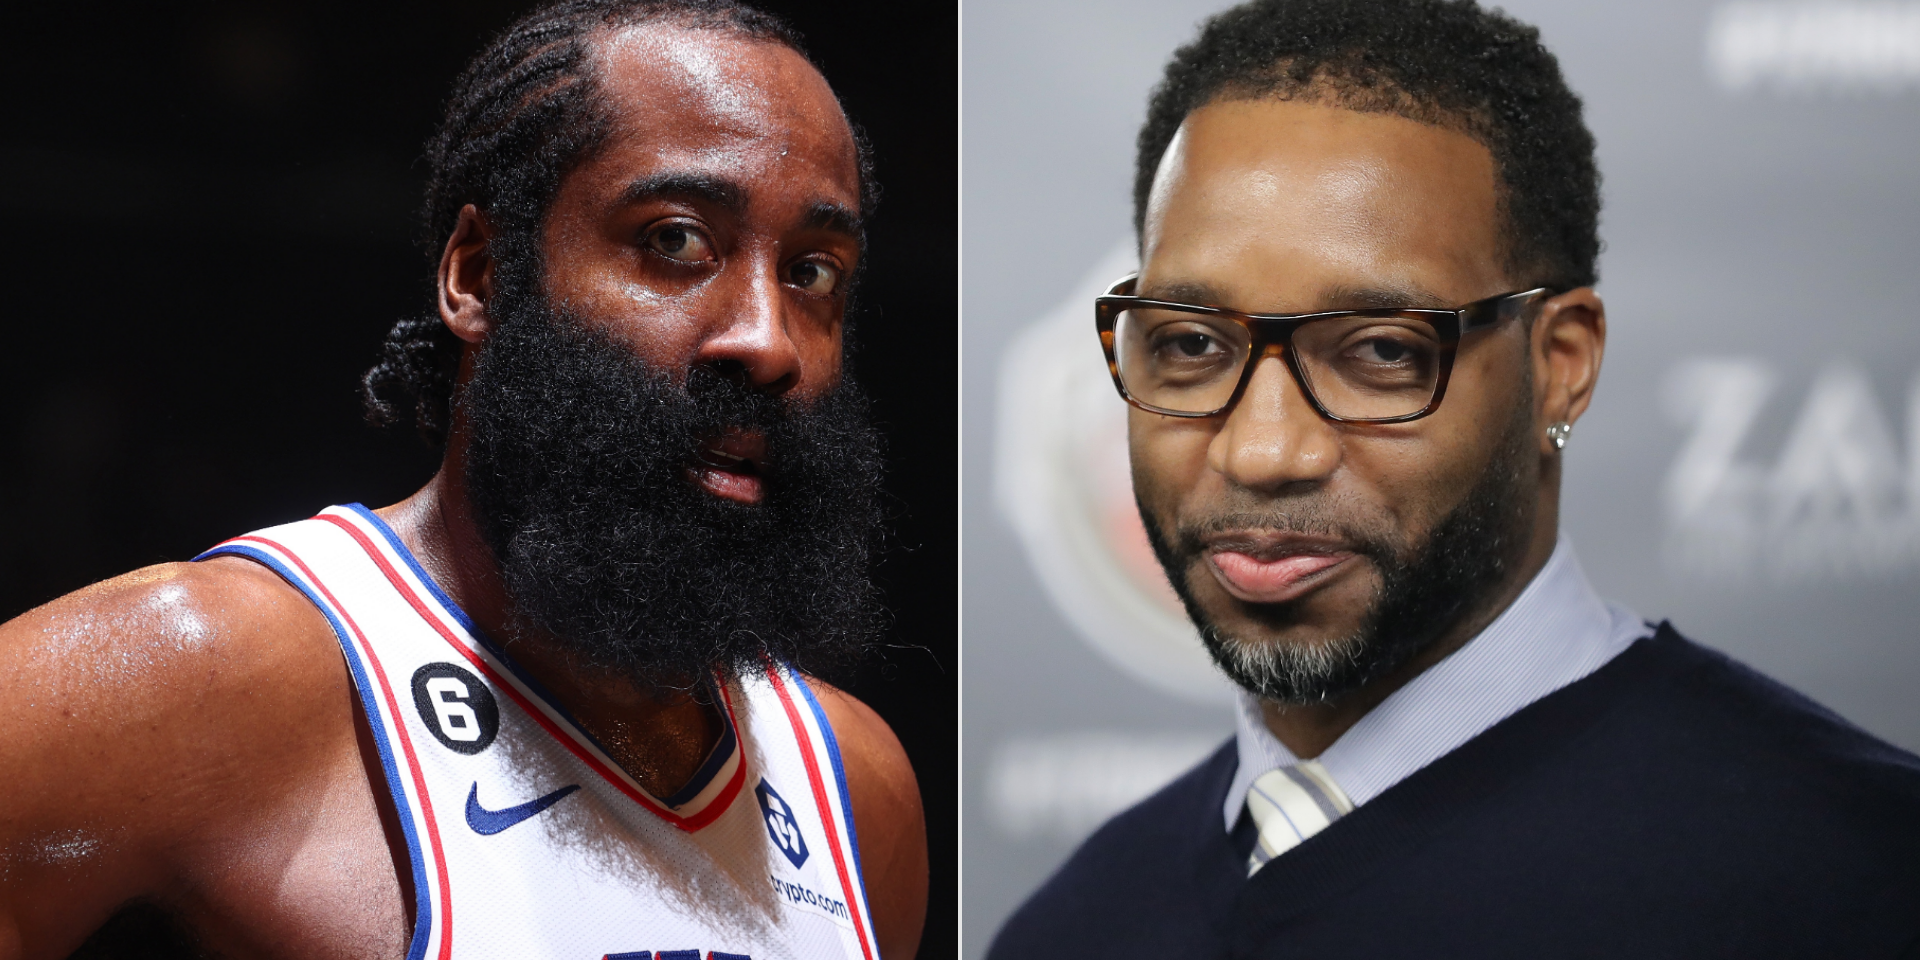 Tracy McGrady weighs in on James Harden trade rumors, says 76ers star's request 'makes zero sense'